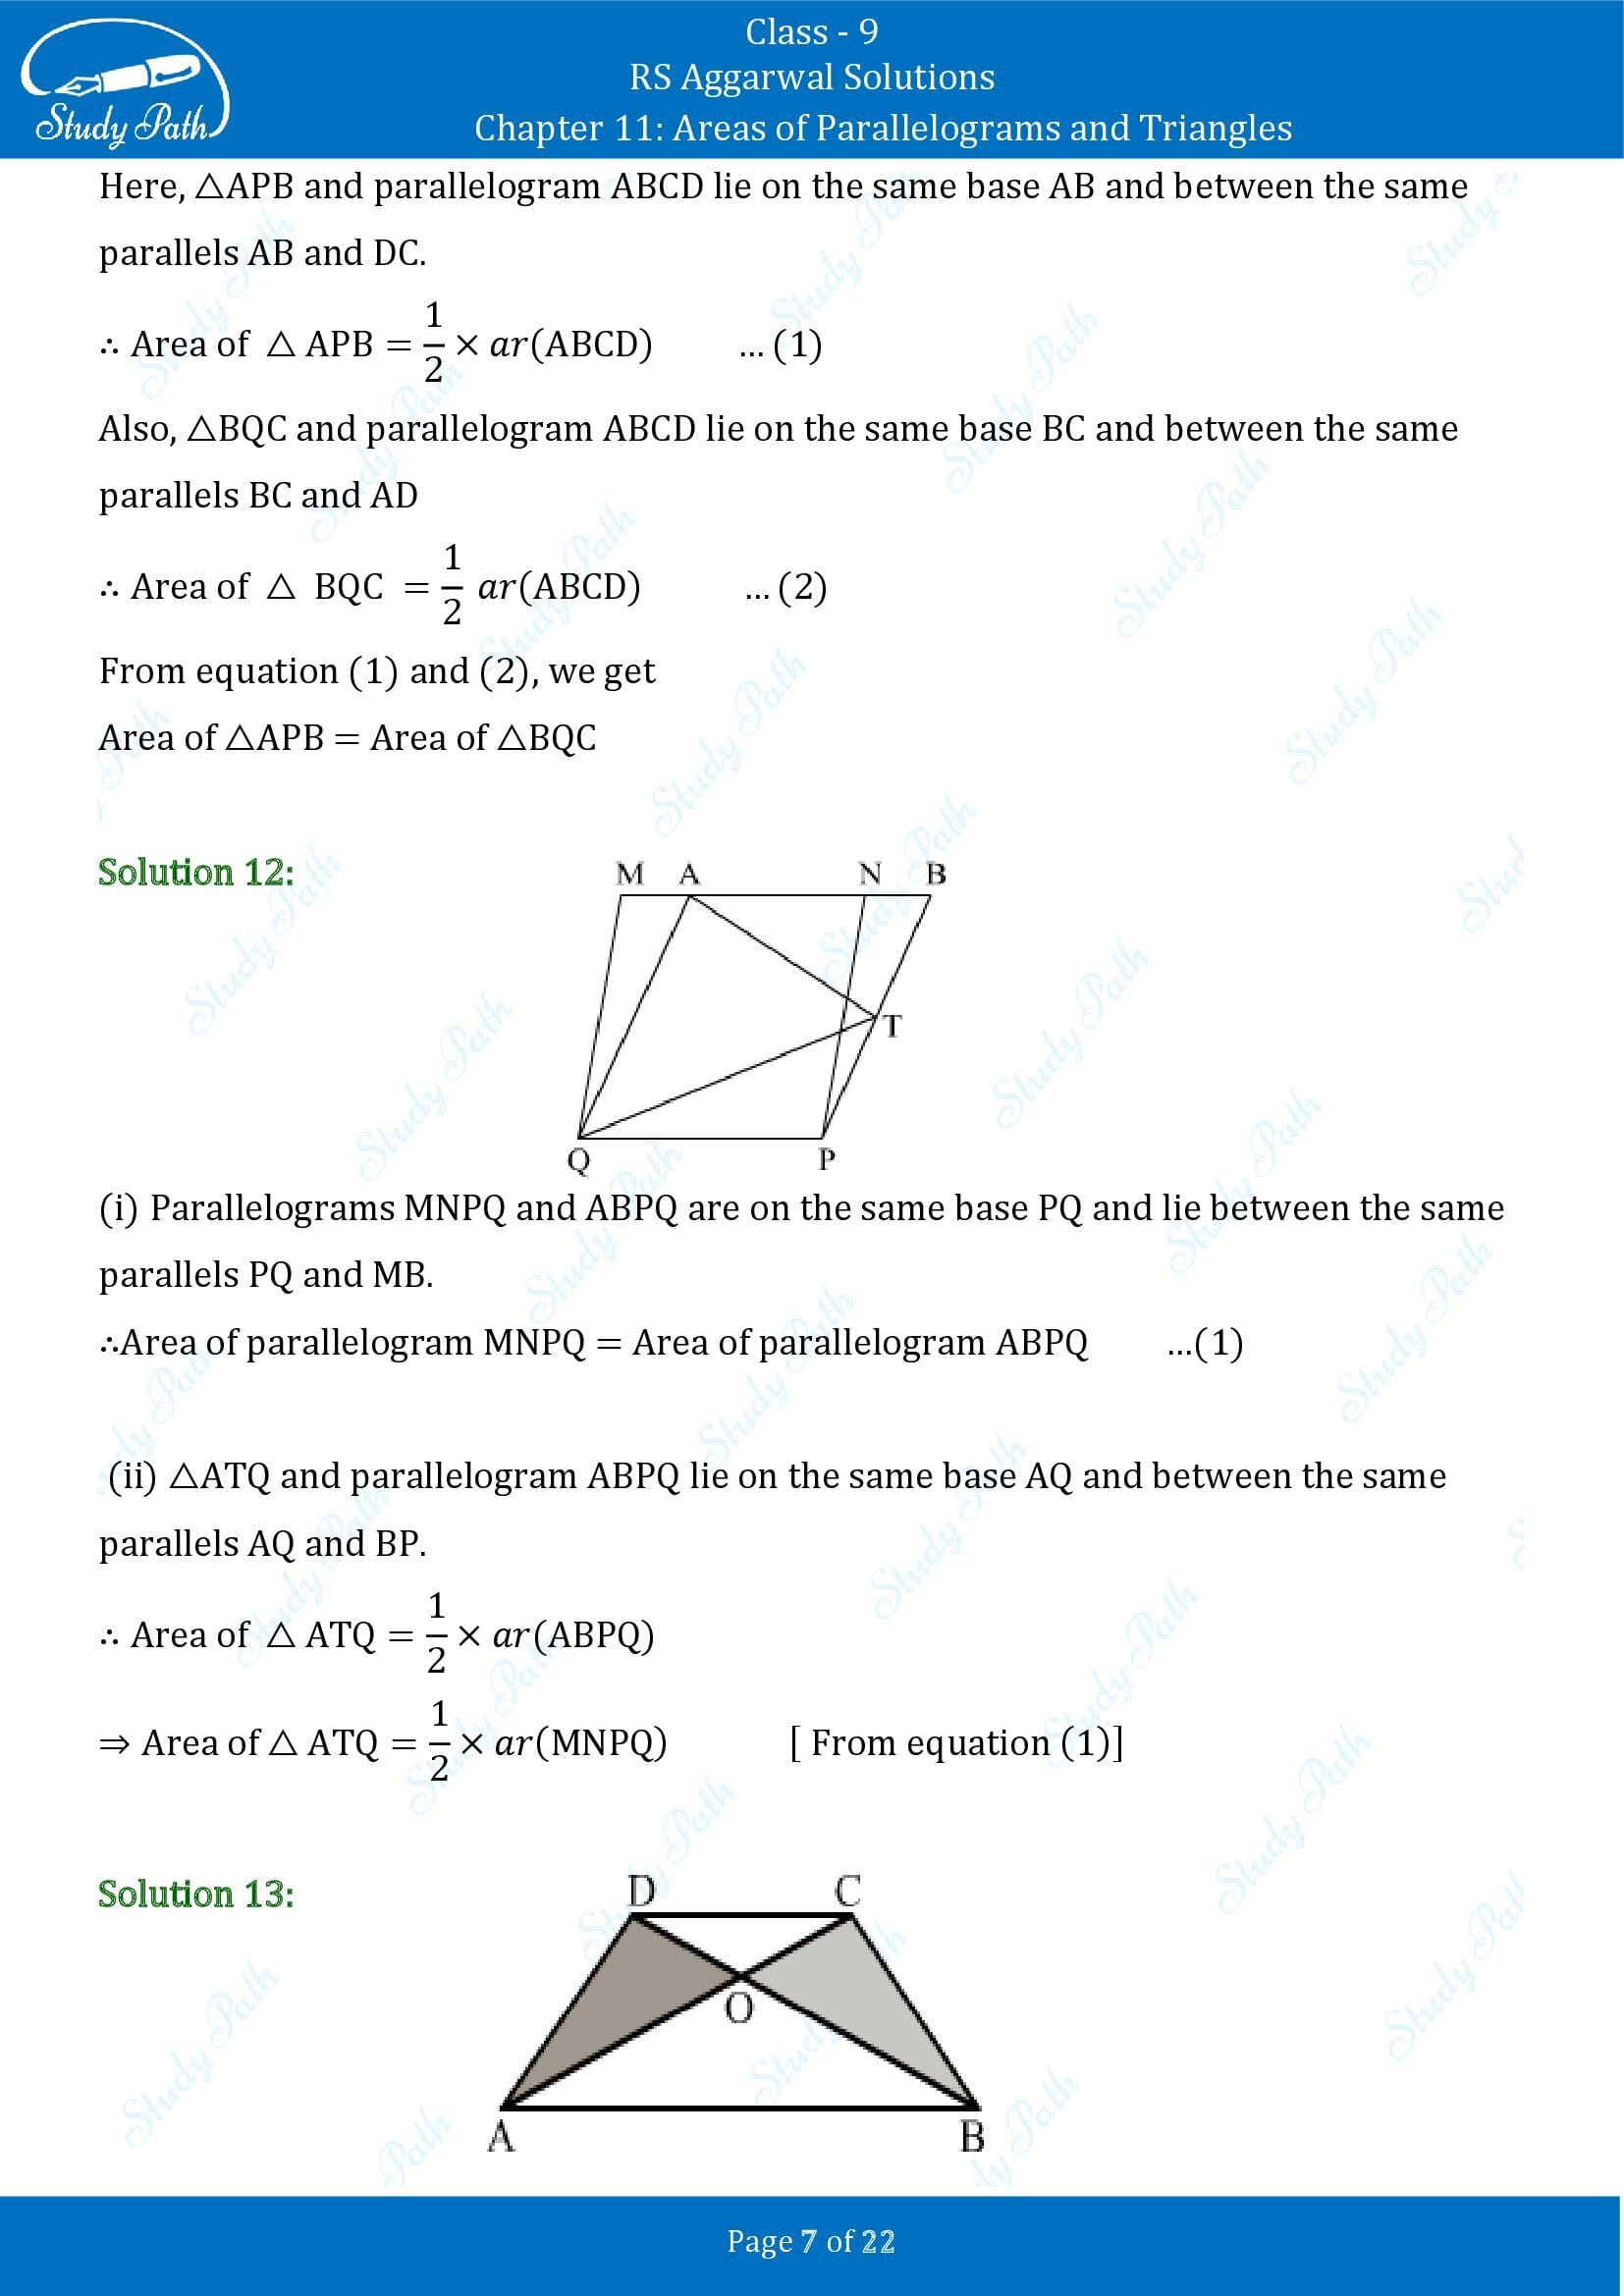 RS Aggarwal Solutions Class 9 Chapter 11 Areas of Parallelograms and Triangles Exercise 11 00007